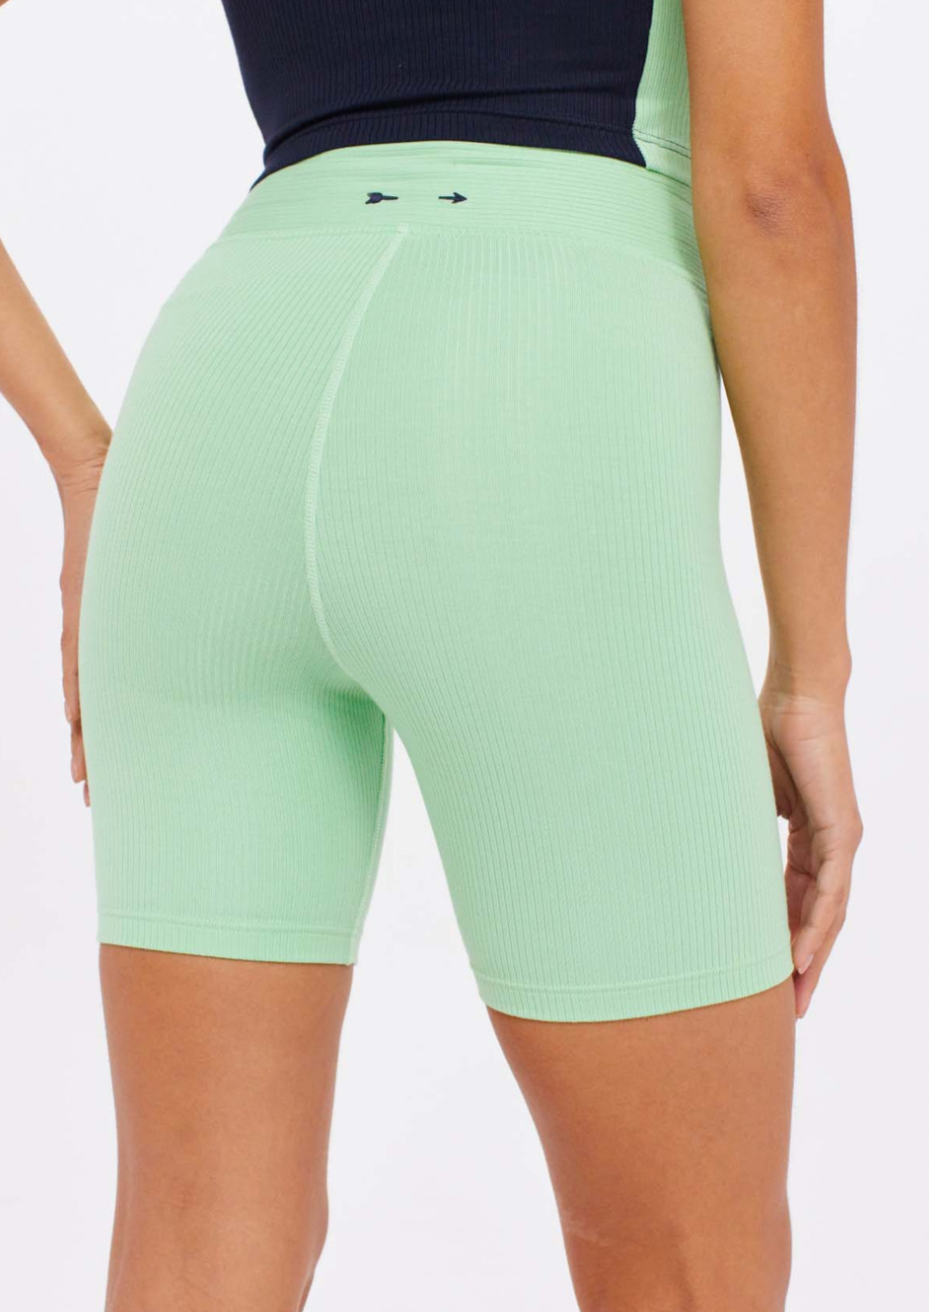 Solstice Spin Short - Neo Mint, by The Upside Freshen up any outfit with our Solstice Spin Short.  Our 6" length spin short Contrast embroidered arrow logo at back Stretchy soft rib fabrication in Neo mint Perfect for soft sport activities Mid rise